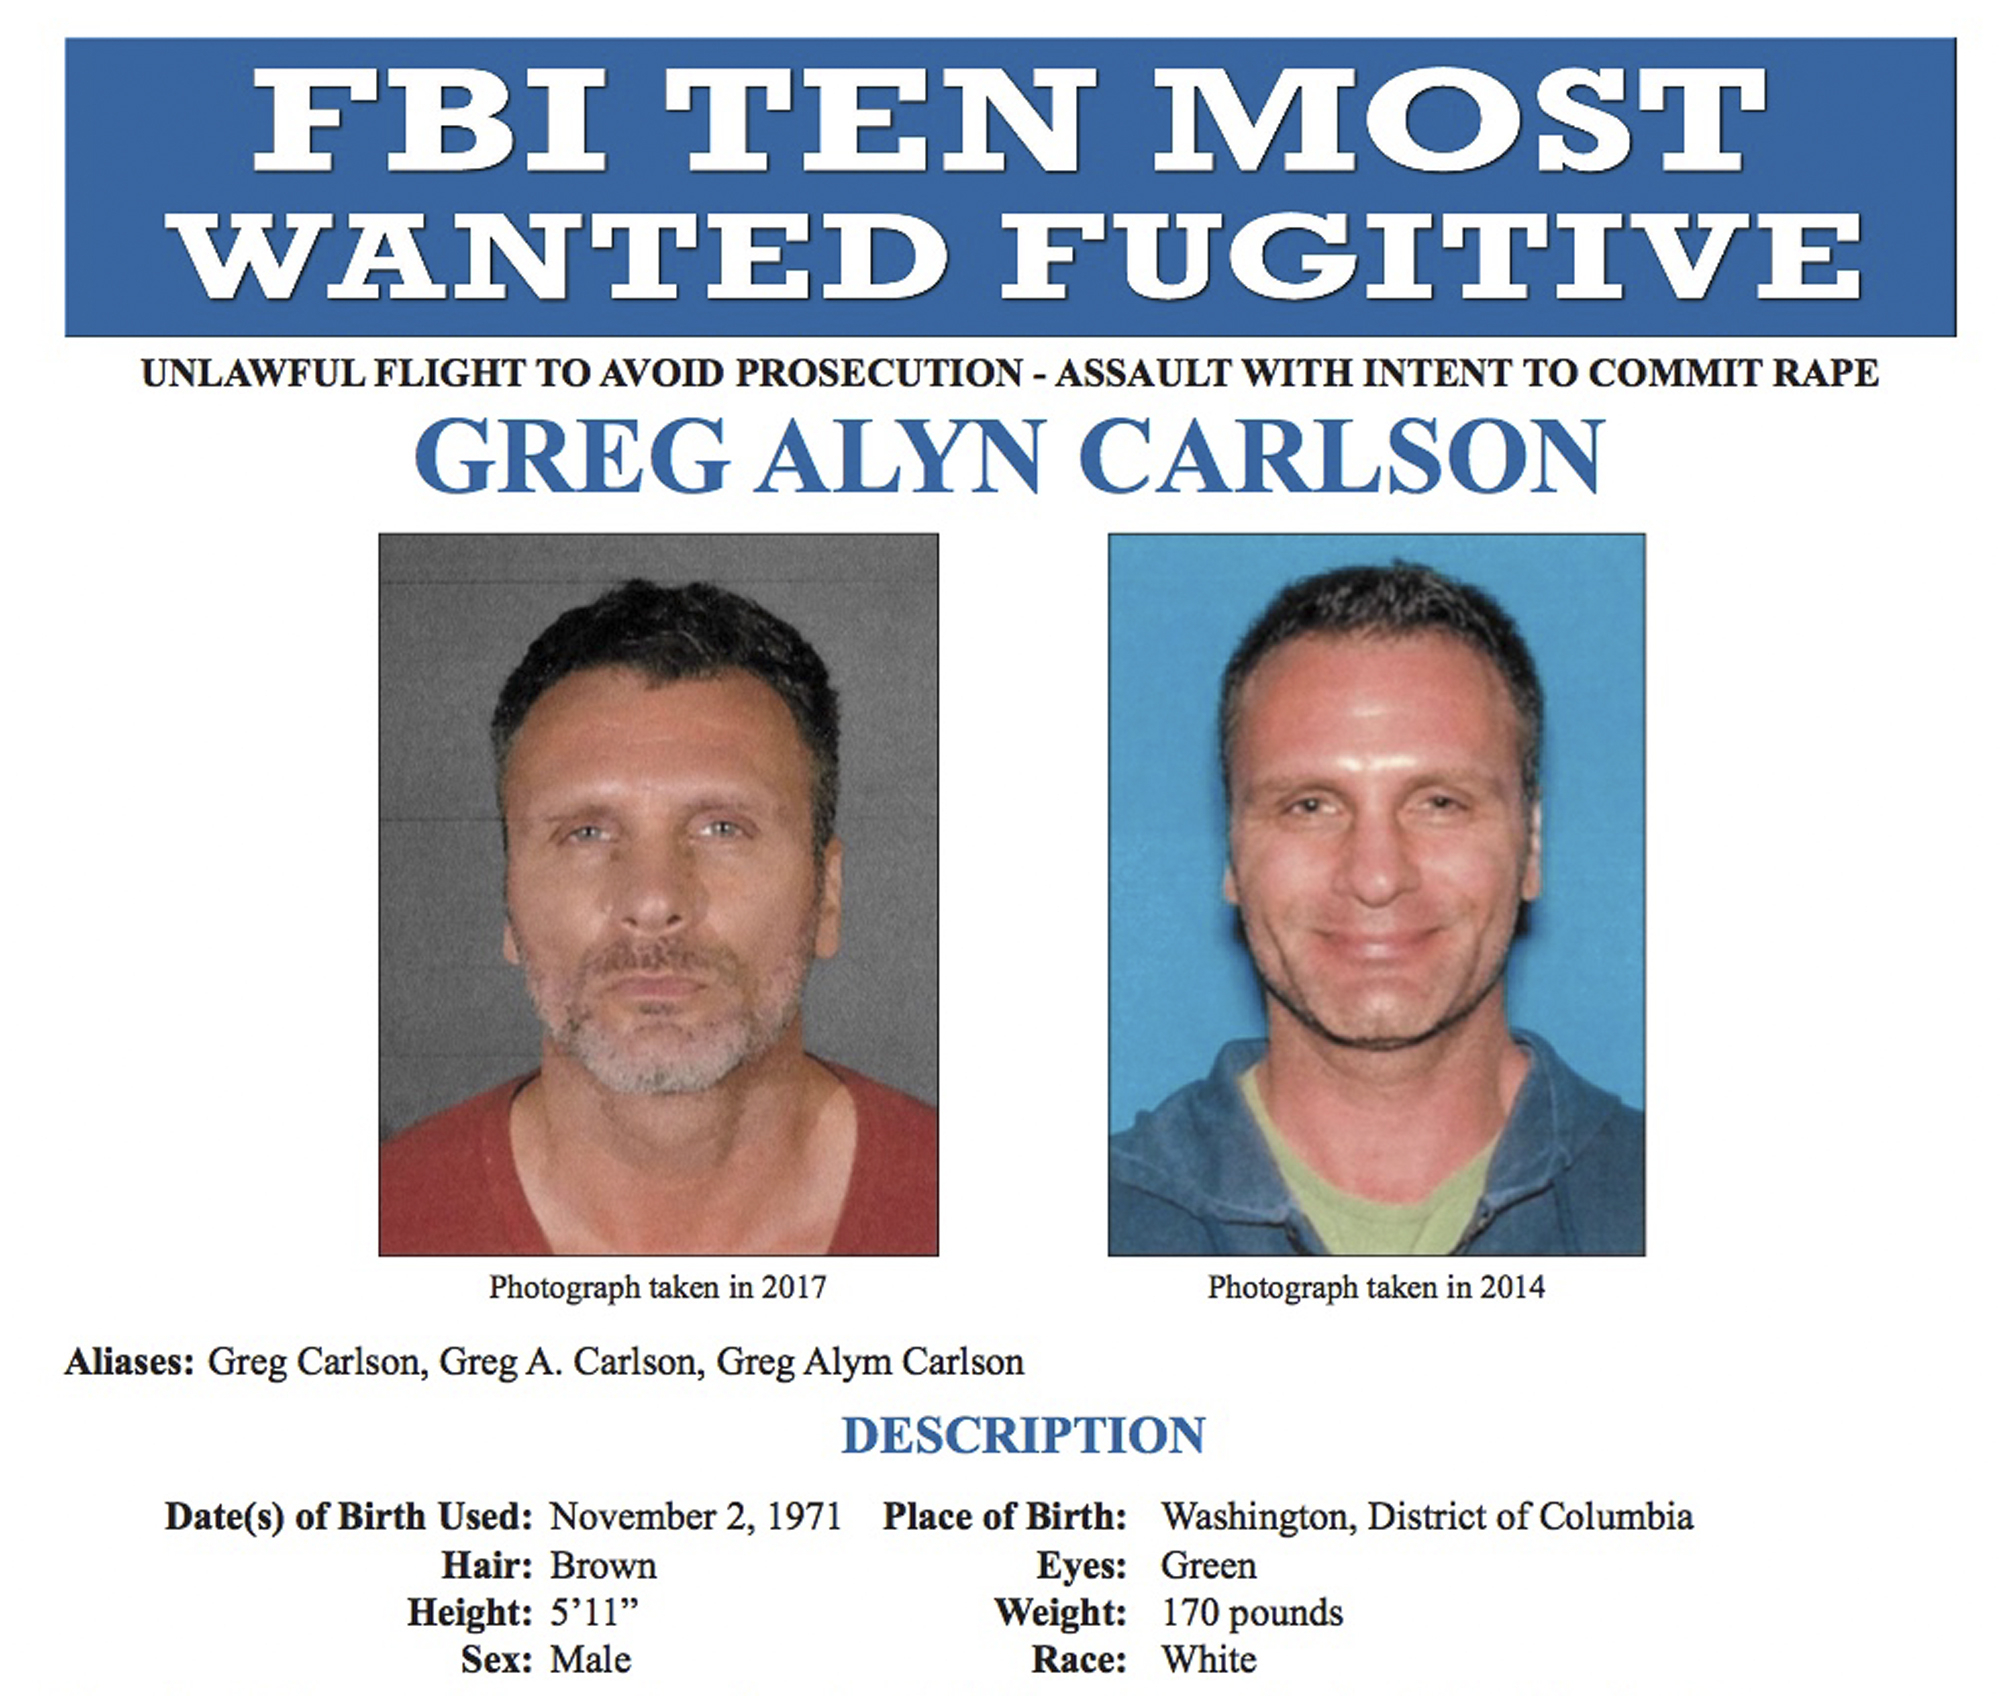 FILE - This undated file photos released on Thursday, Sept. 27, 2018 by the FBI shows an FBI wanted poster of Greg Alyn Carlson. The FBI tracked Carlson, a man they think was one of the country's 10 most-wanted fugitives, to a North Carolina motel, w